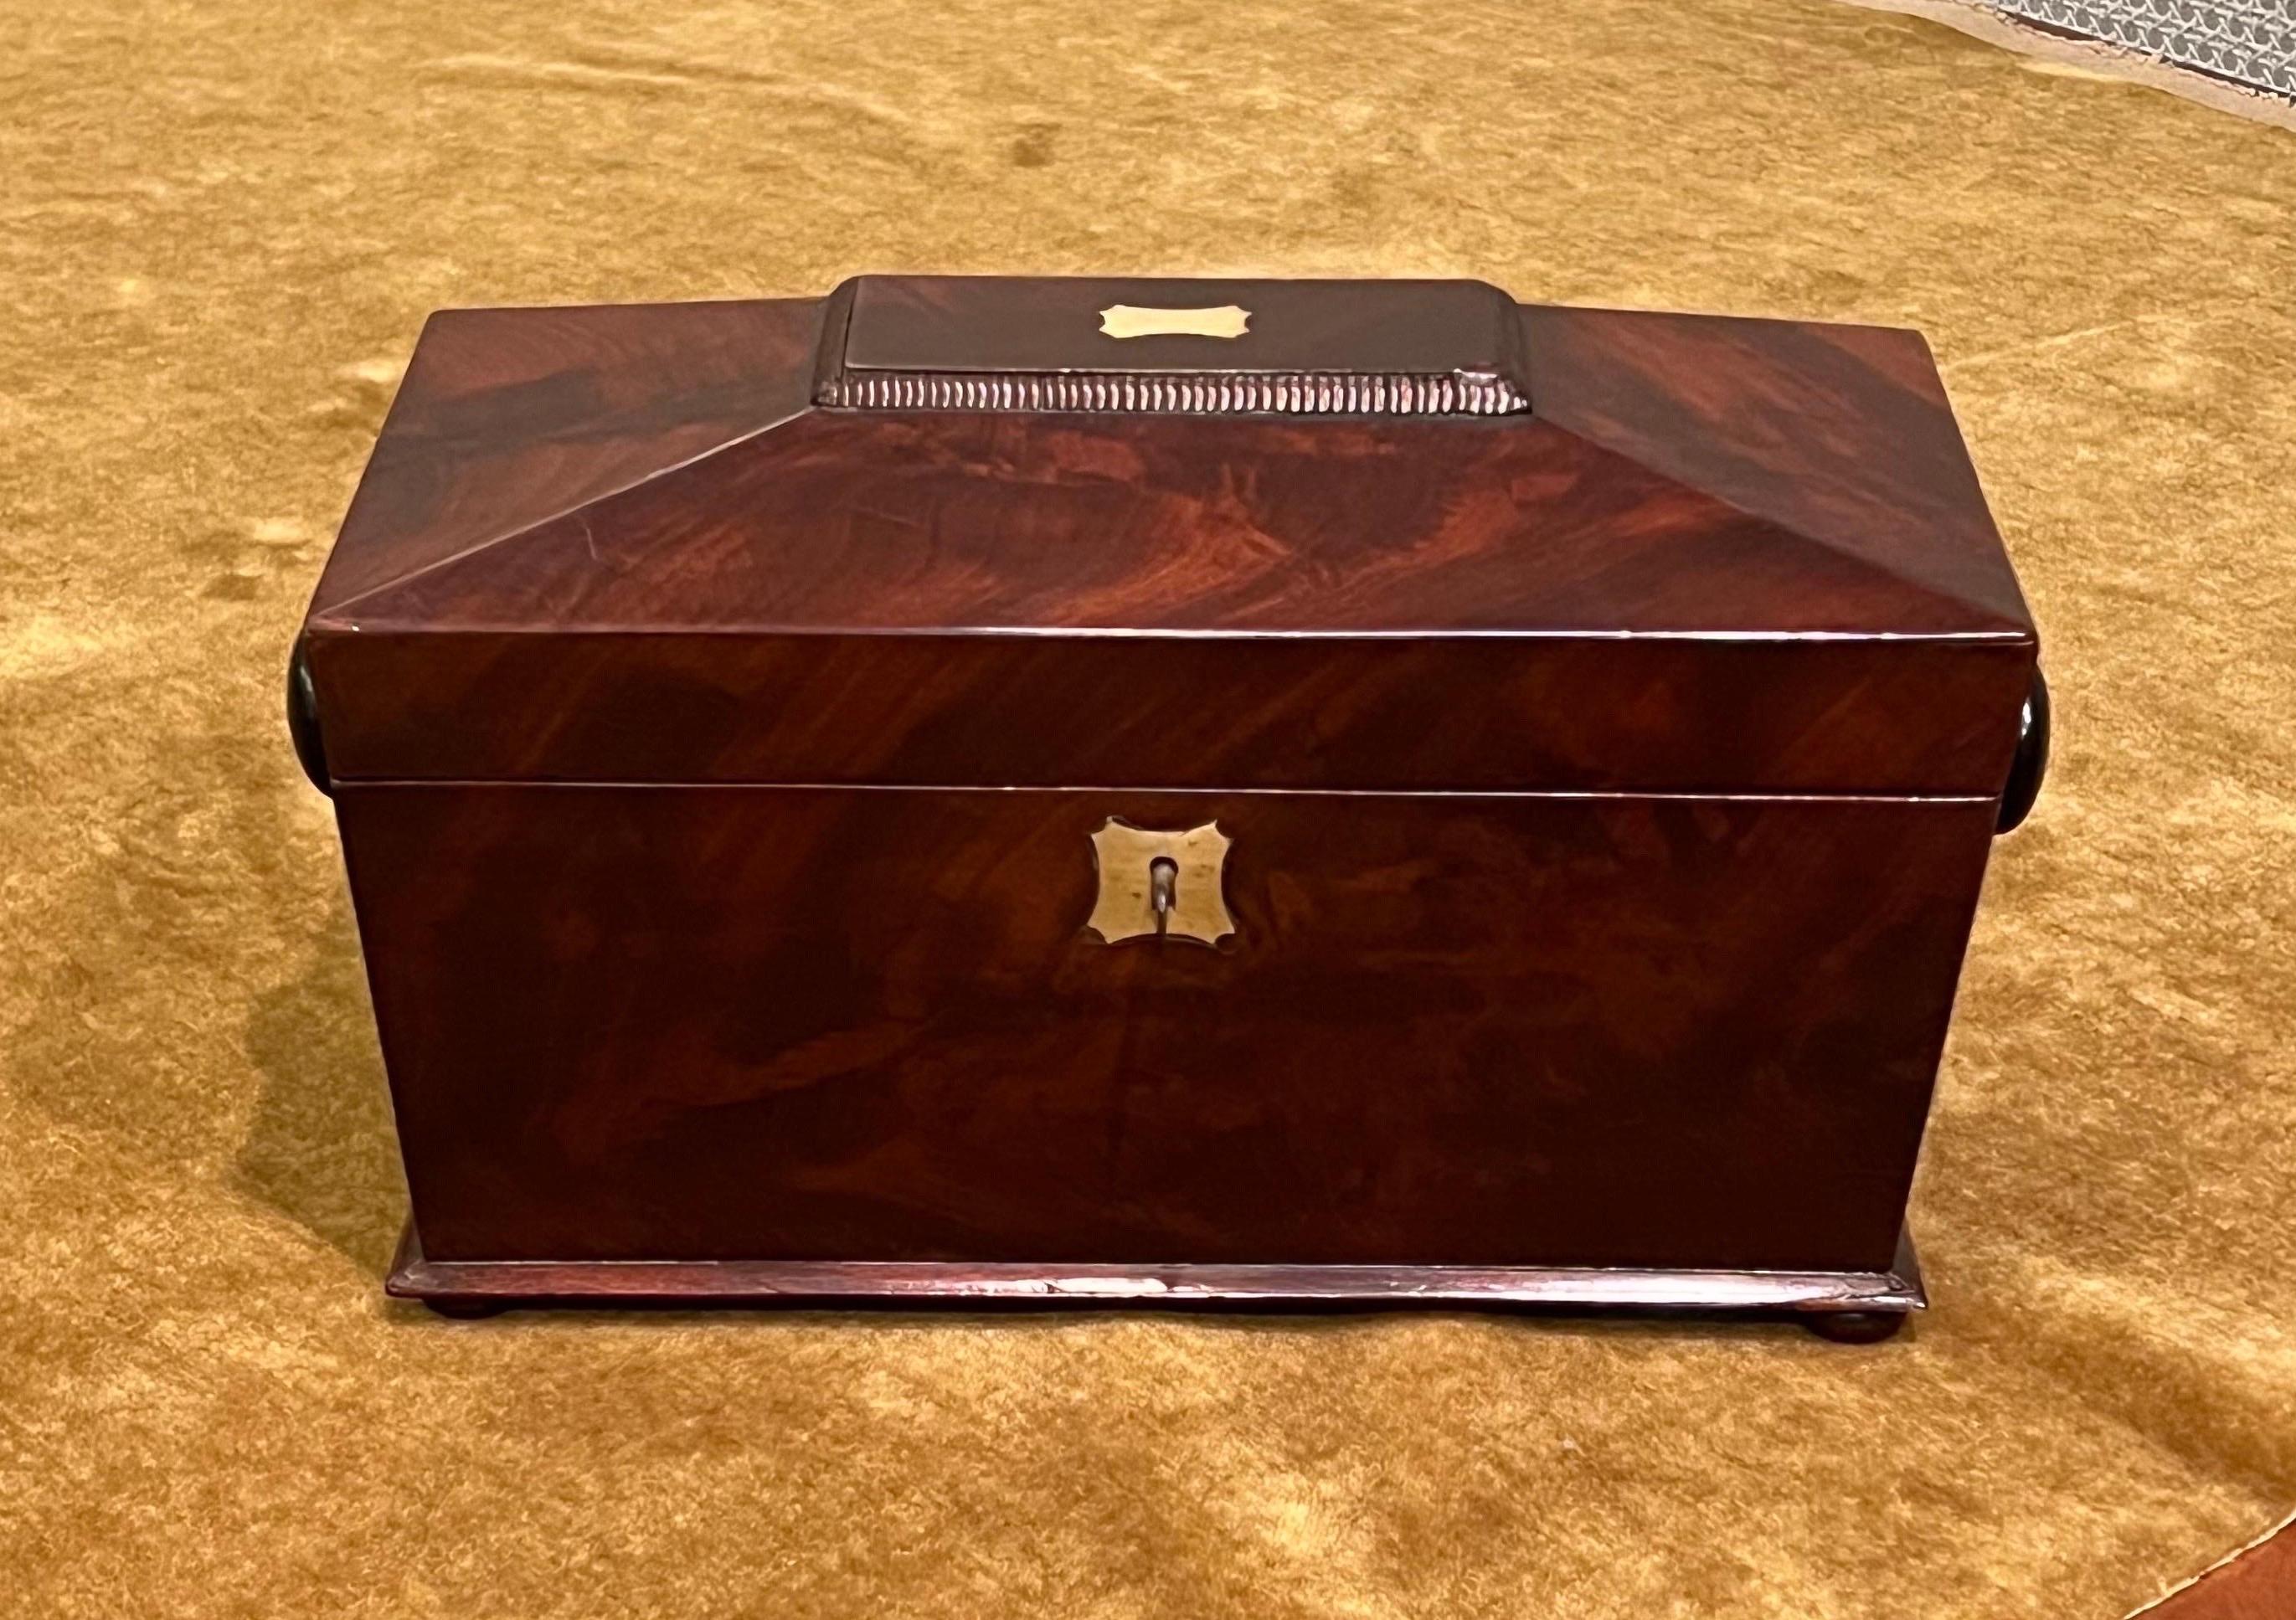 Early 19th century Sarcophagus mahogany tea caddy 
Very rare retaining it's origanal removable lidded compartments made of
cigar box mahogany, as well as its origanal Cut glass mixing bowl.
Box has been cleaned & waxed. Makes a great gift.